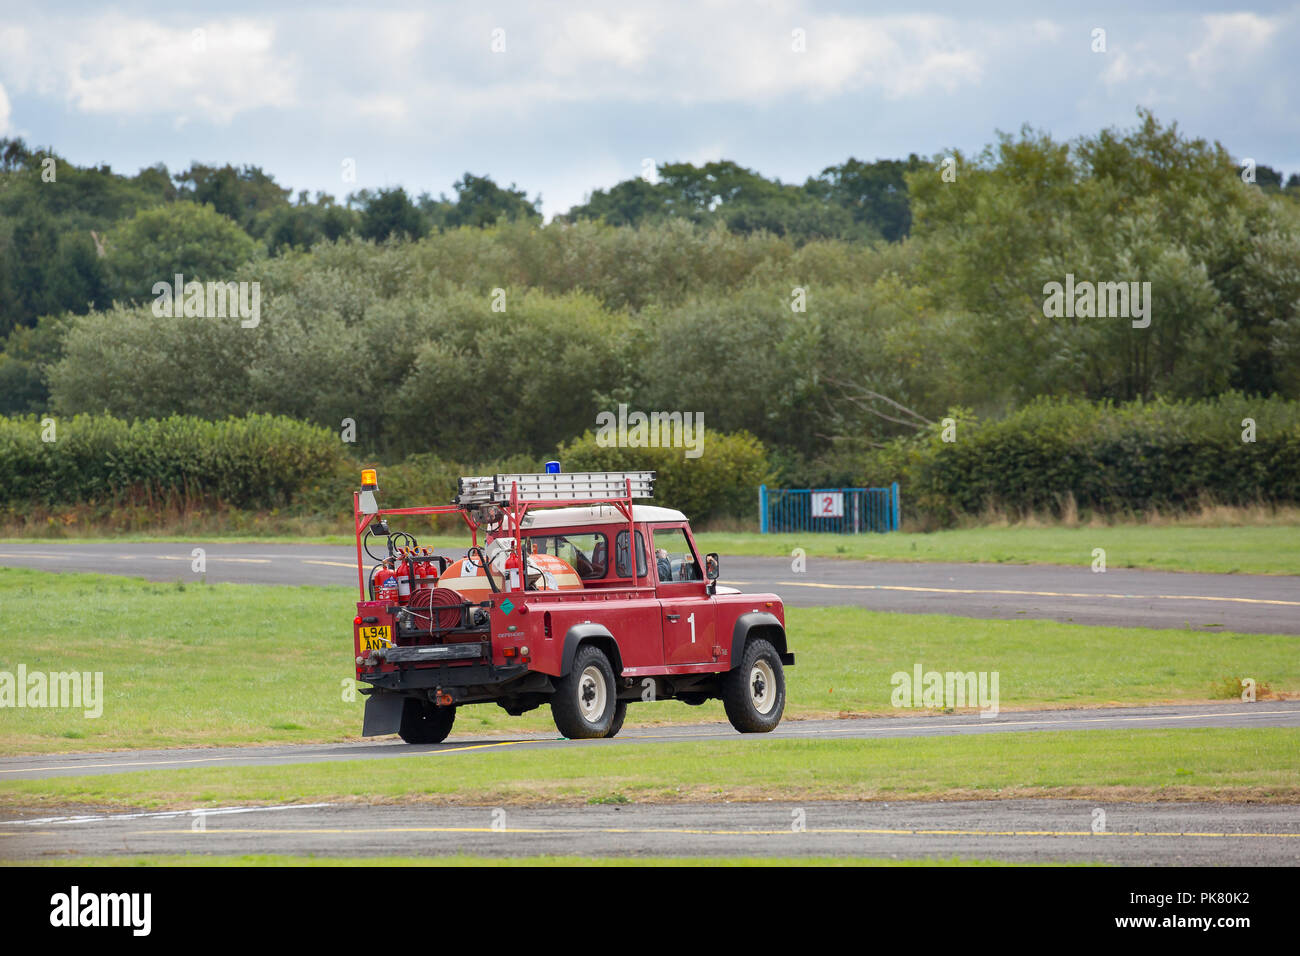 Emergency fire-fighting vehicle, blue light flashing, driving to runway at airfield to await landing of small light aircraft possibly in difficulty. Stock Photo